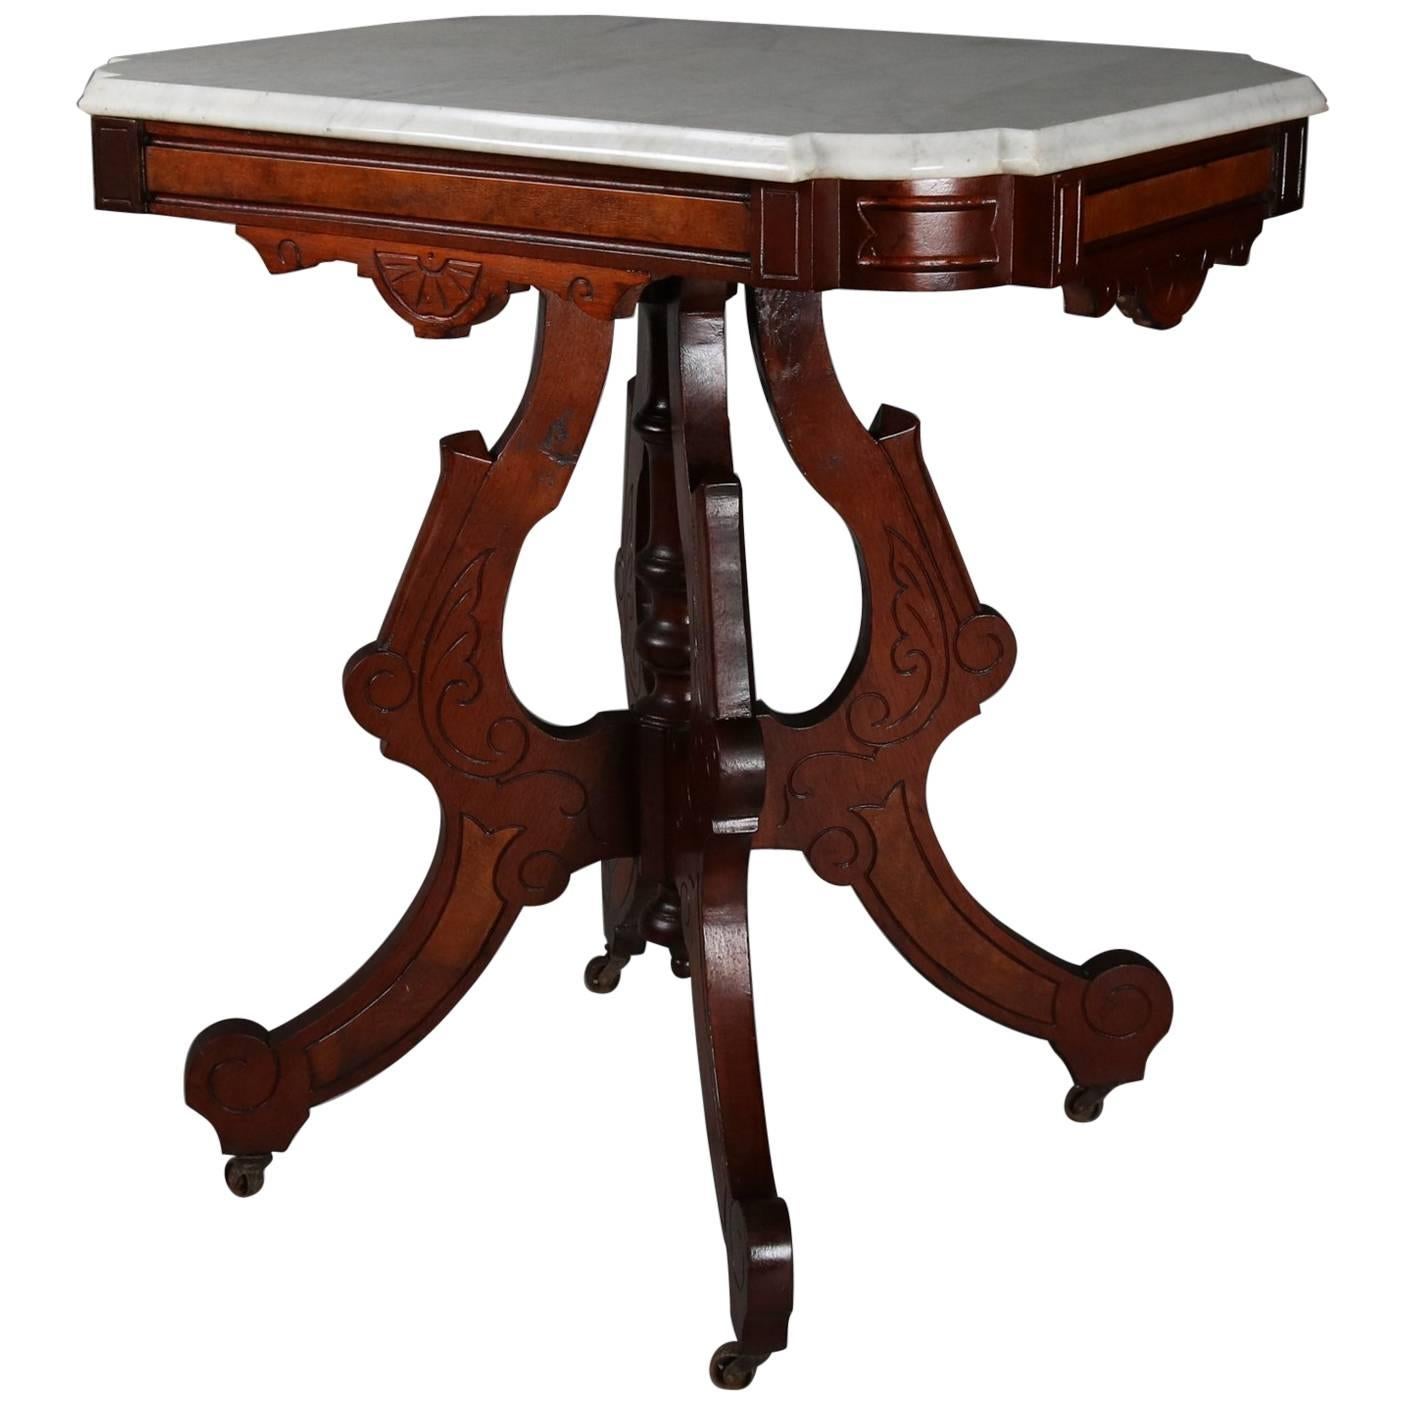 Antique Eastlake Marble Top Incised Walnut Side Table, circa 1880